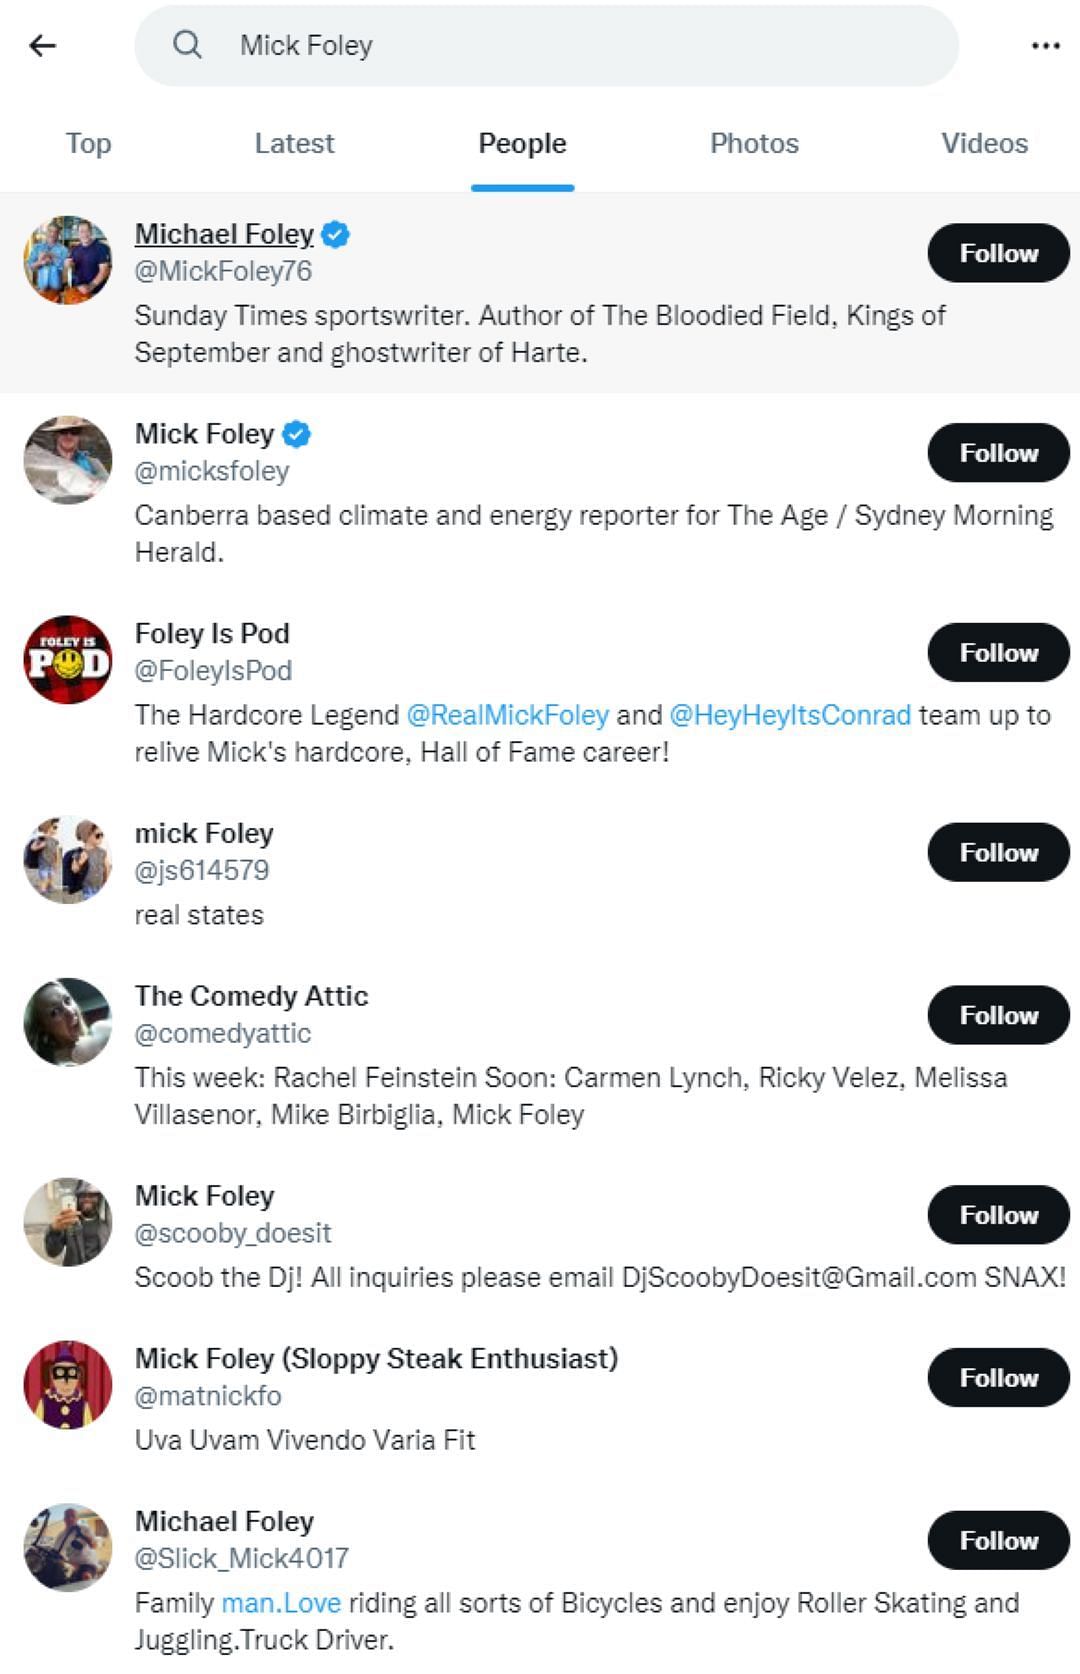 Search results for Mick Foley on Twitter